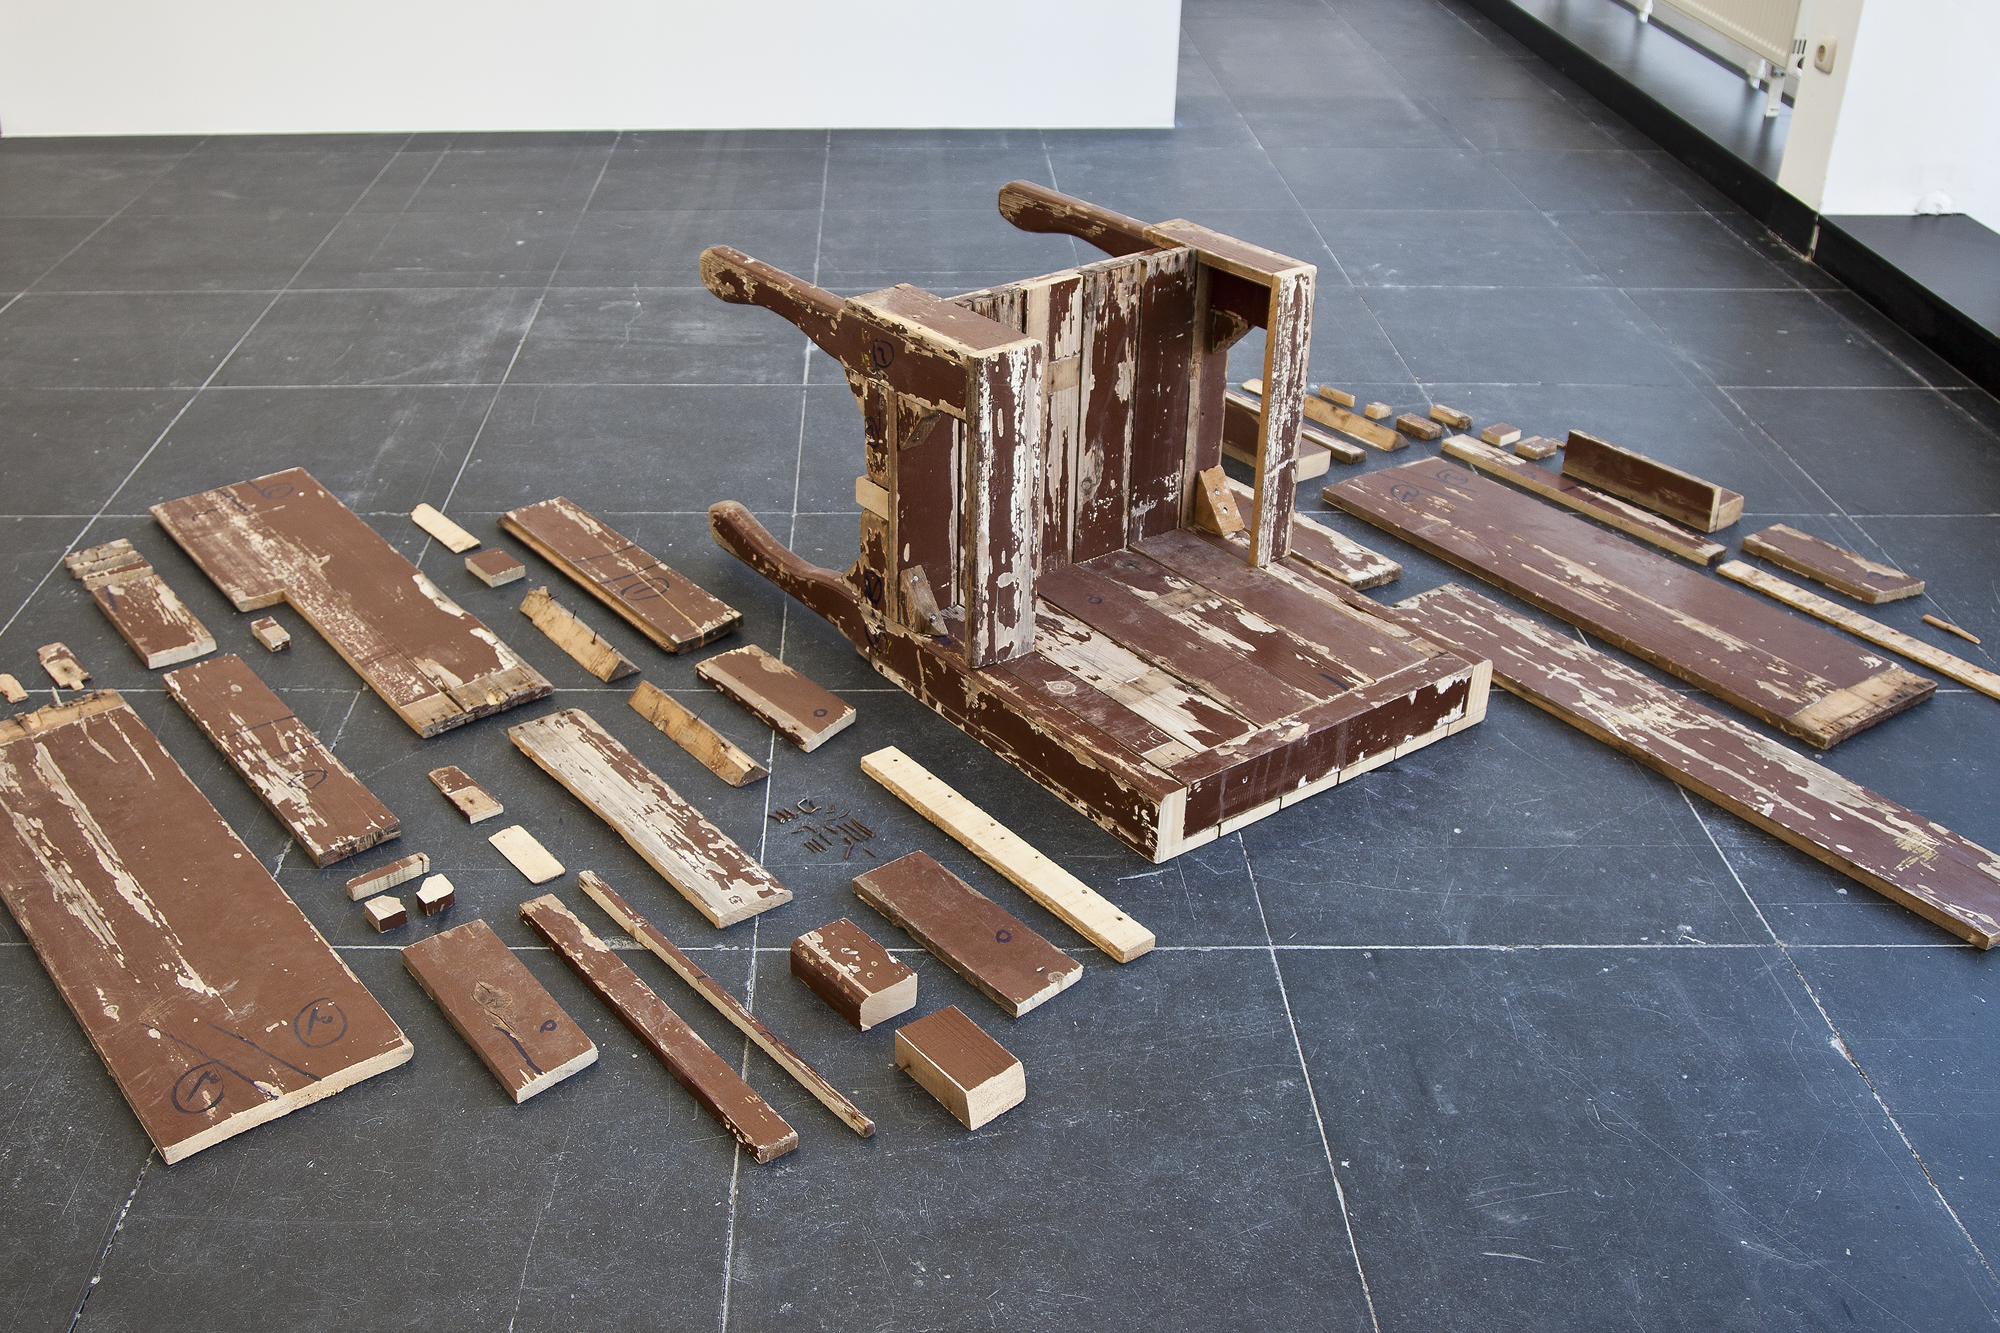  Khaled Barakeh  Regarding the Pain of Others &nbsp;(2013) Wood, dimensions variable Courtesy the artist    